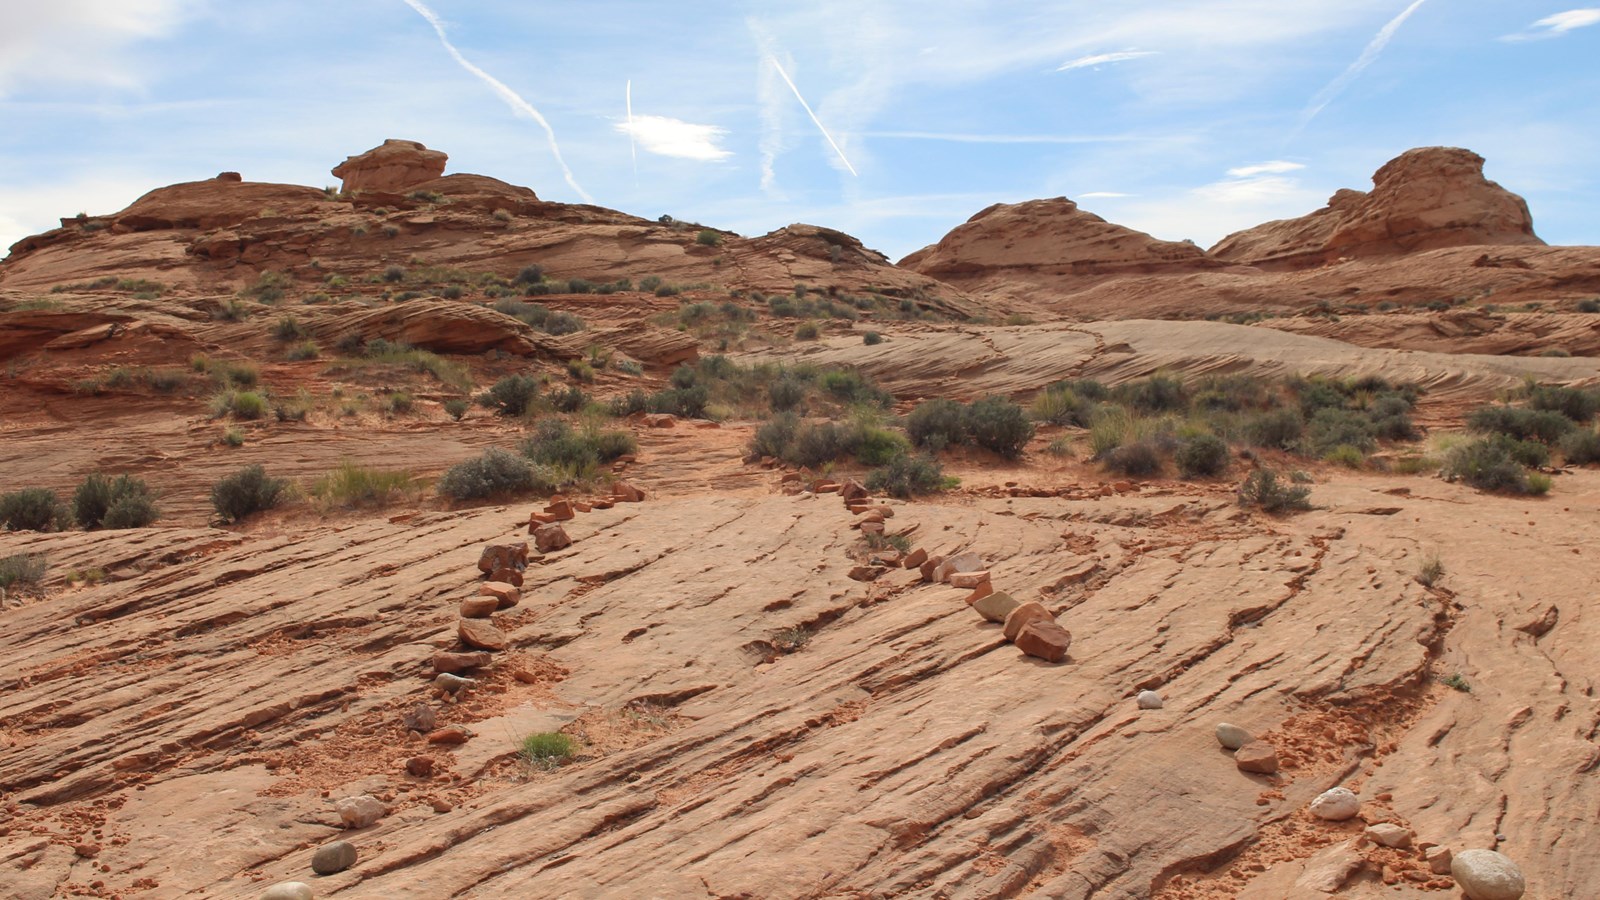 Group of sandstone buttes. Wide trail marked by small rocks